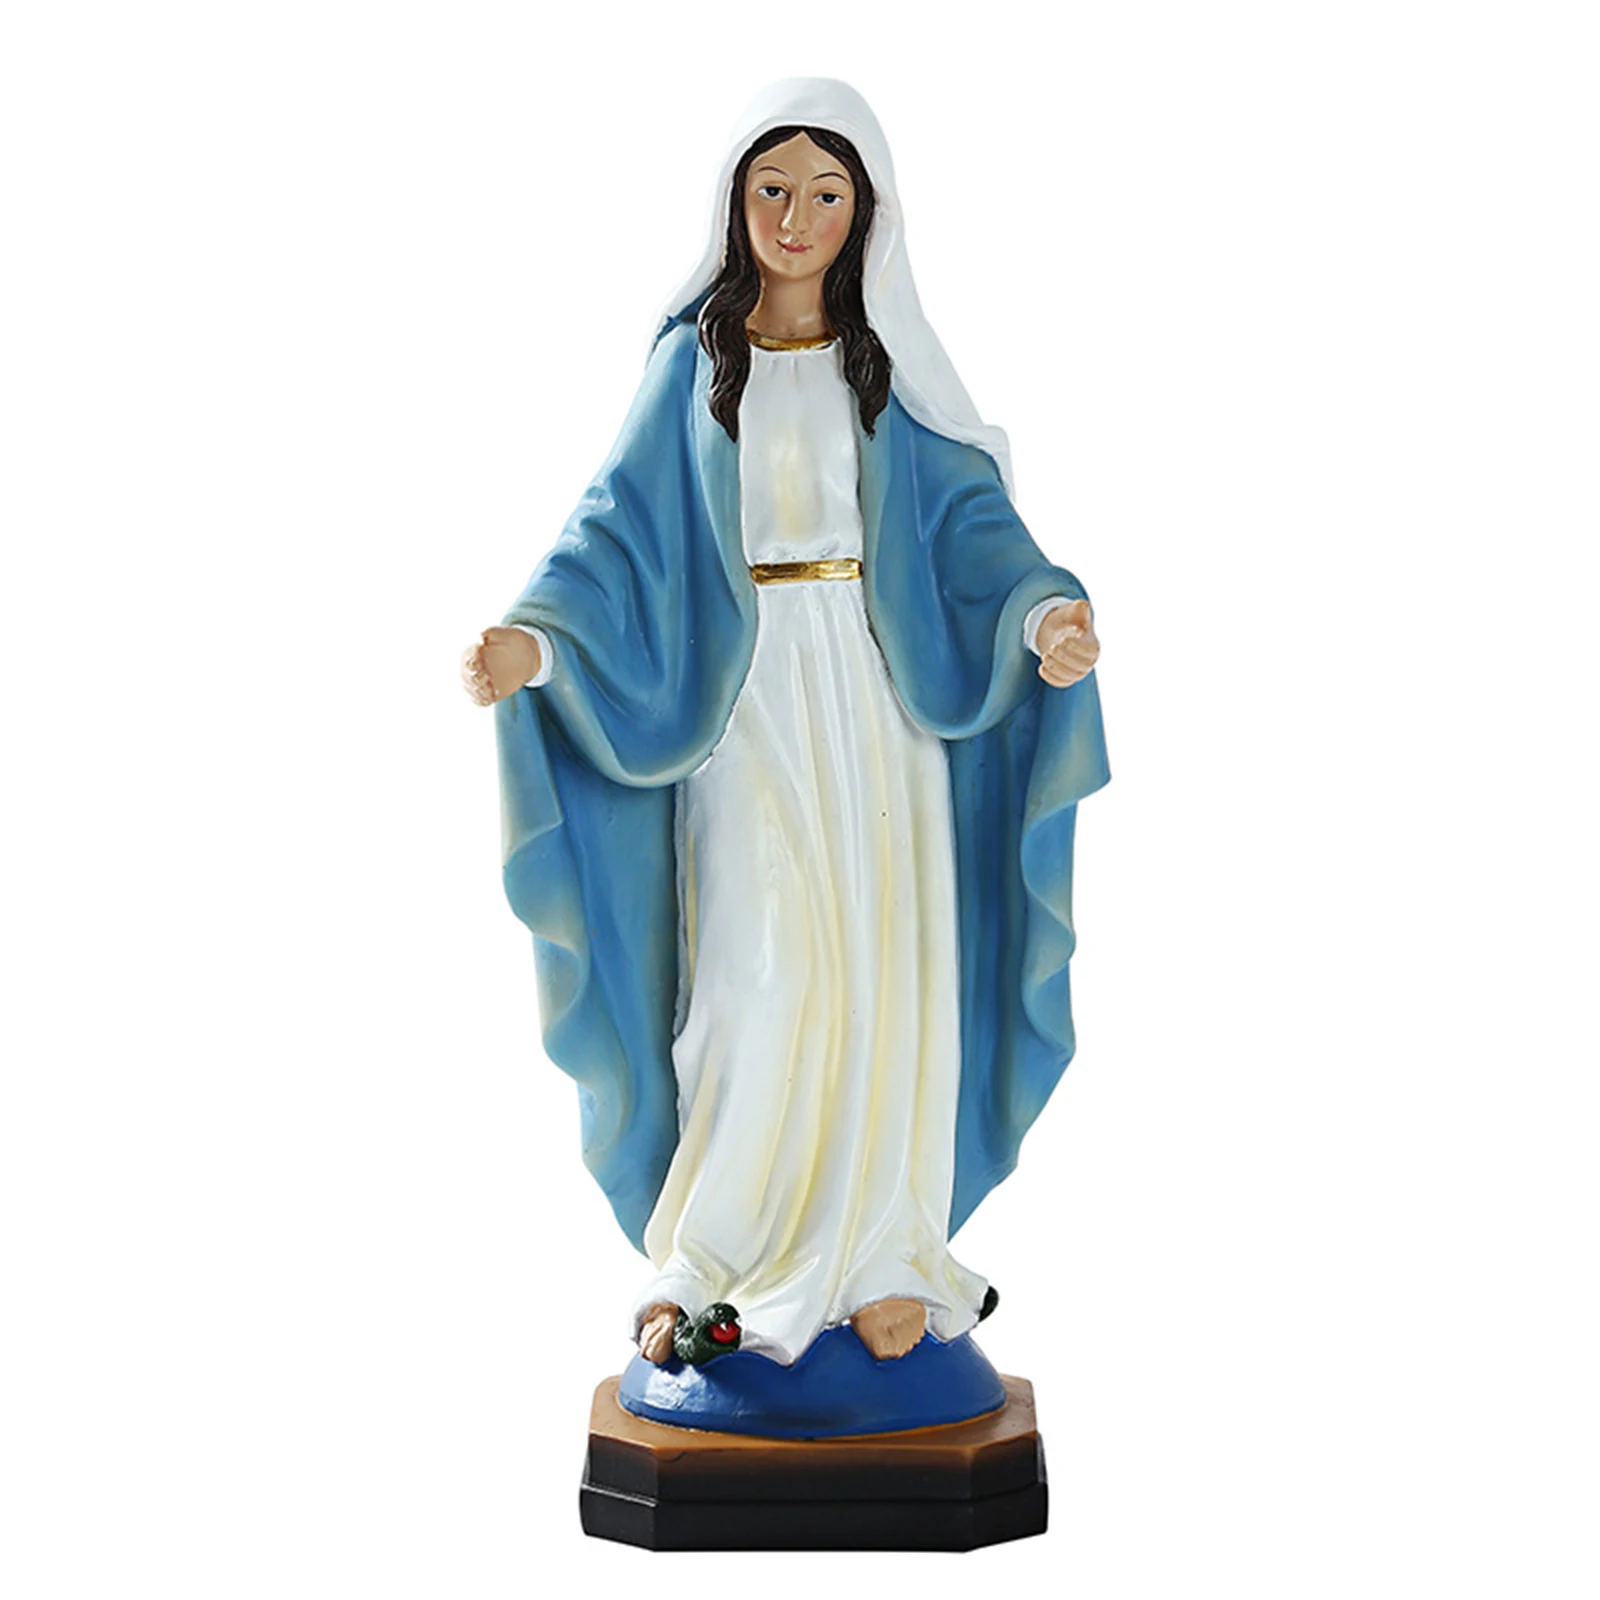 

Our Lady of Grace Blessed Virgin Mary Statue Resin Handmade Crafts Catholic Religious Ornaments for Home Office H88F